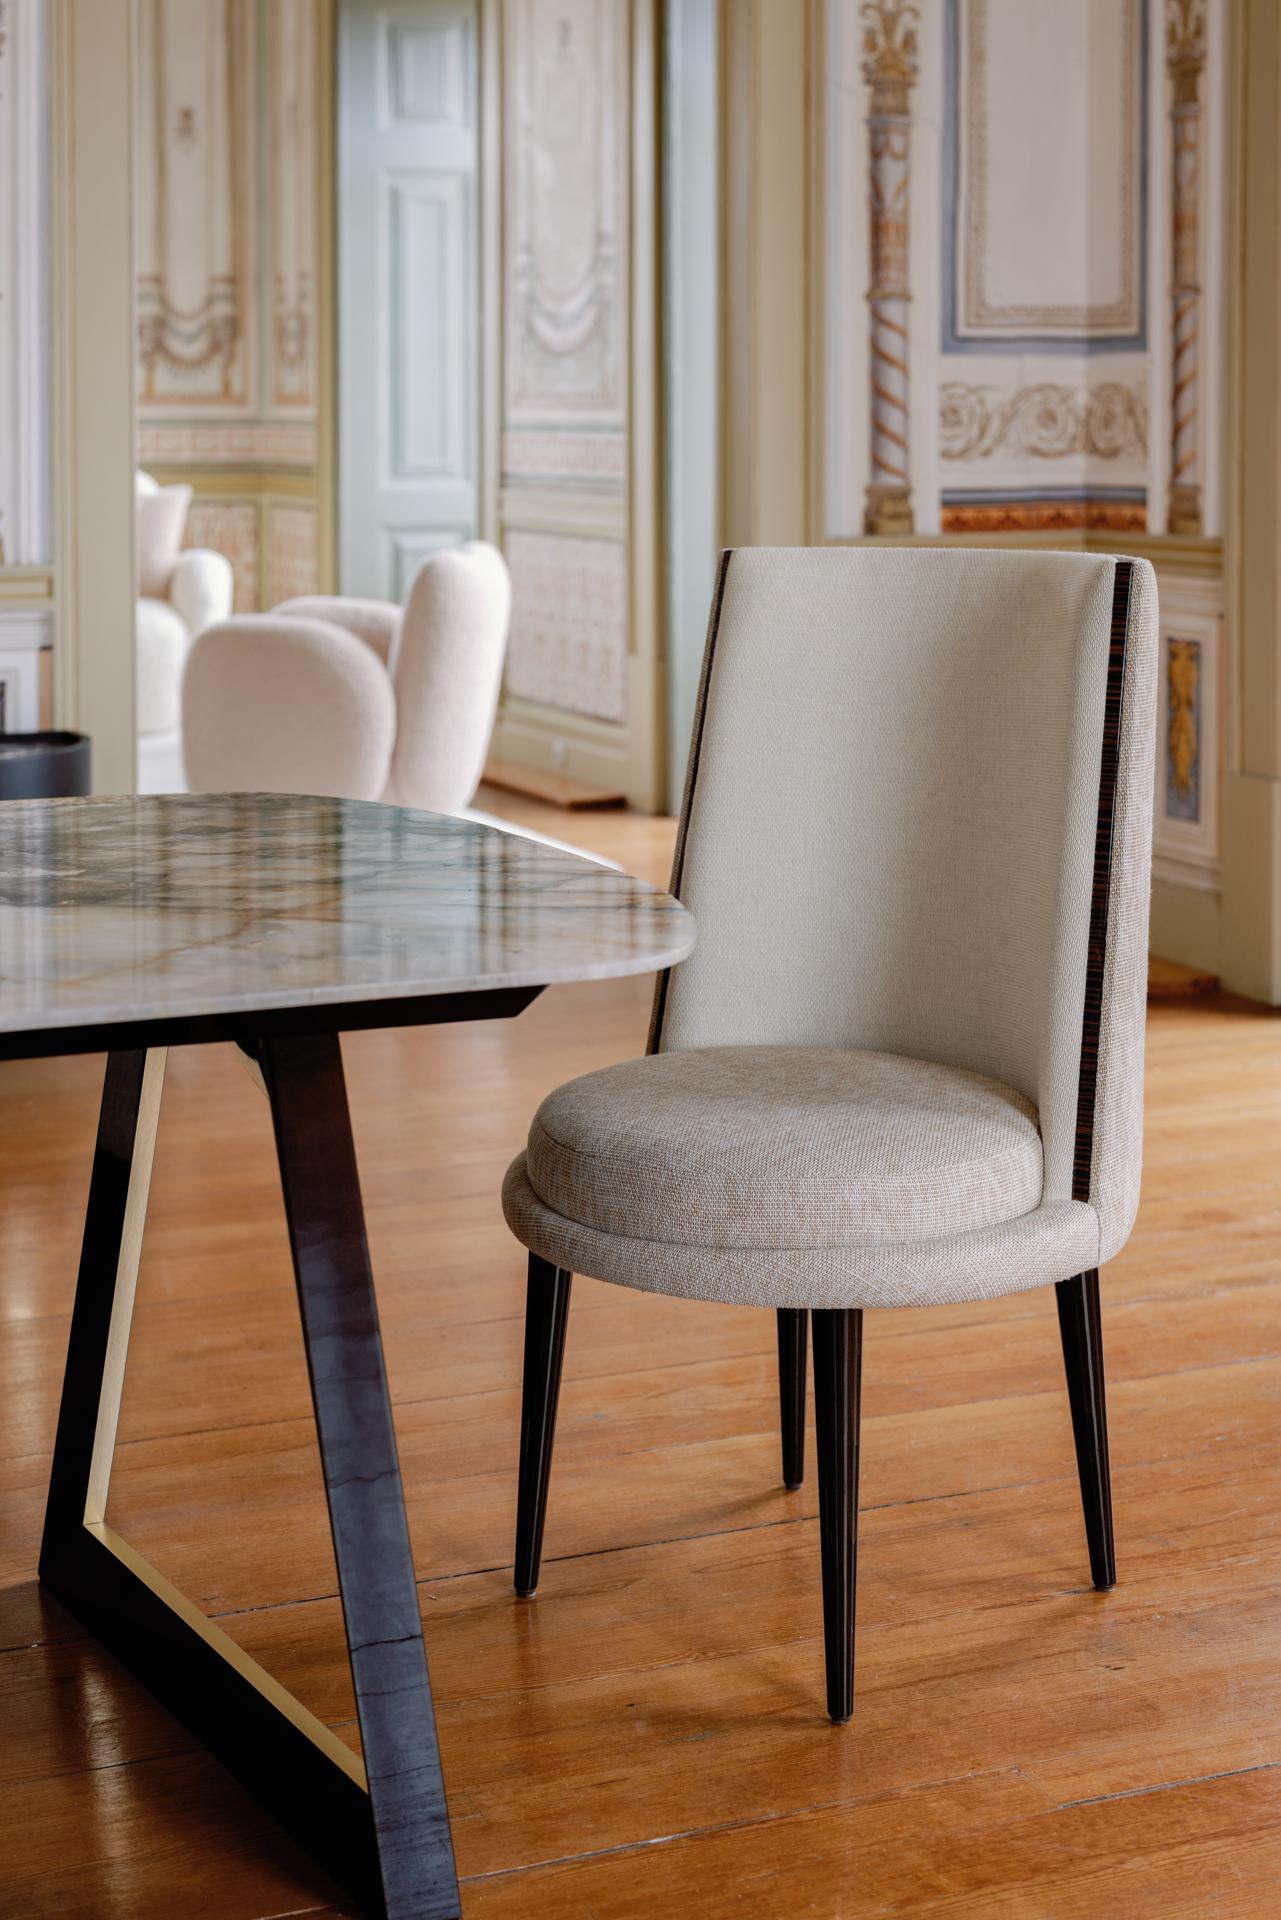 De Castro Chair, Modern Collection, Handcrafted in Portugal - Europe by GF Modern.

The De Castro dining chair is a tribute to one of the most remarkable Portuguese love stories, celebrating the serenity and delicacy of Inês de Castro. Upholstered